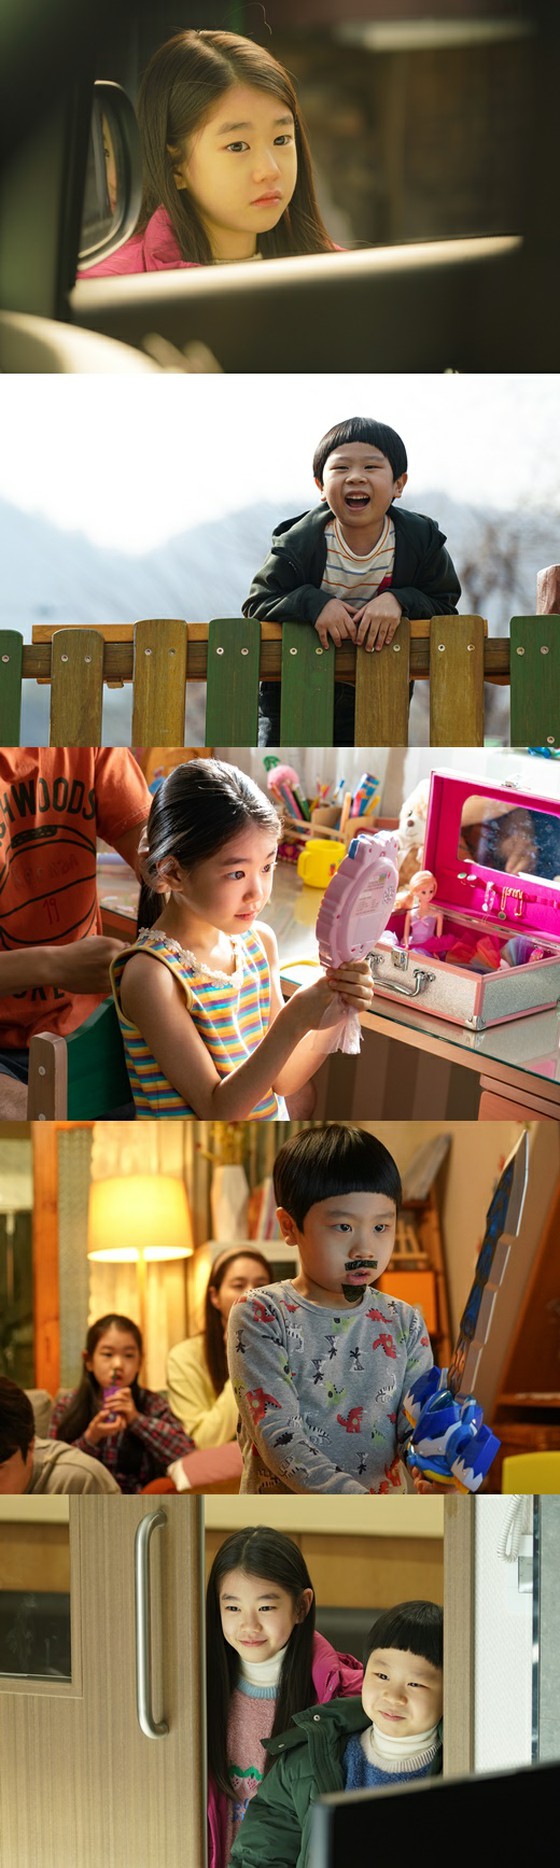 Popular child actors Park So Yi and Kim Jun will appear as twins in the movie "Switch."